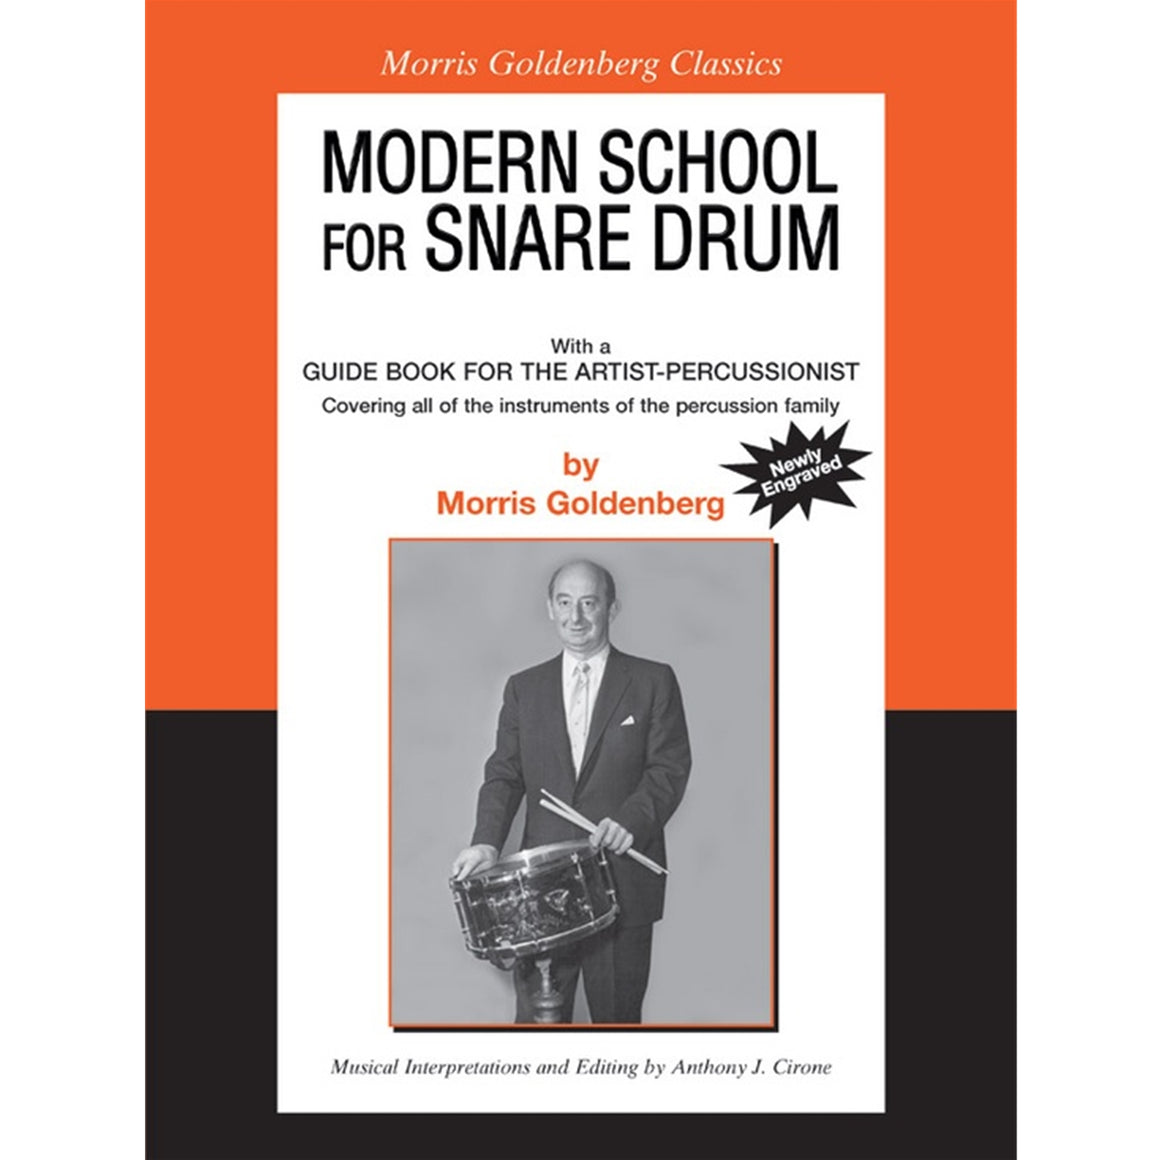 ALFRED 000714B Modern School for Snare Drum